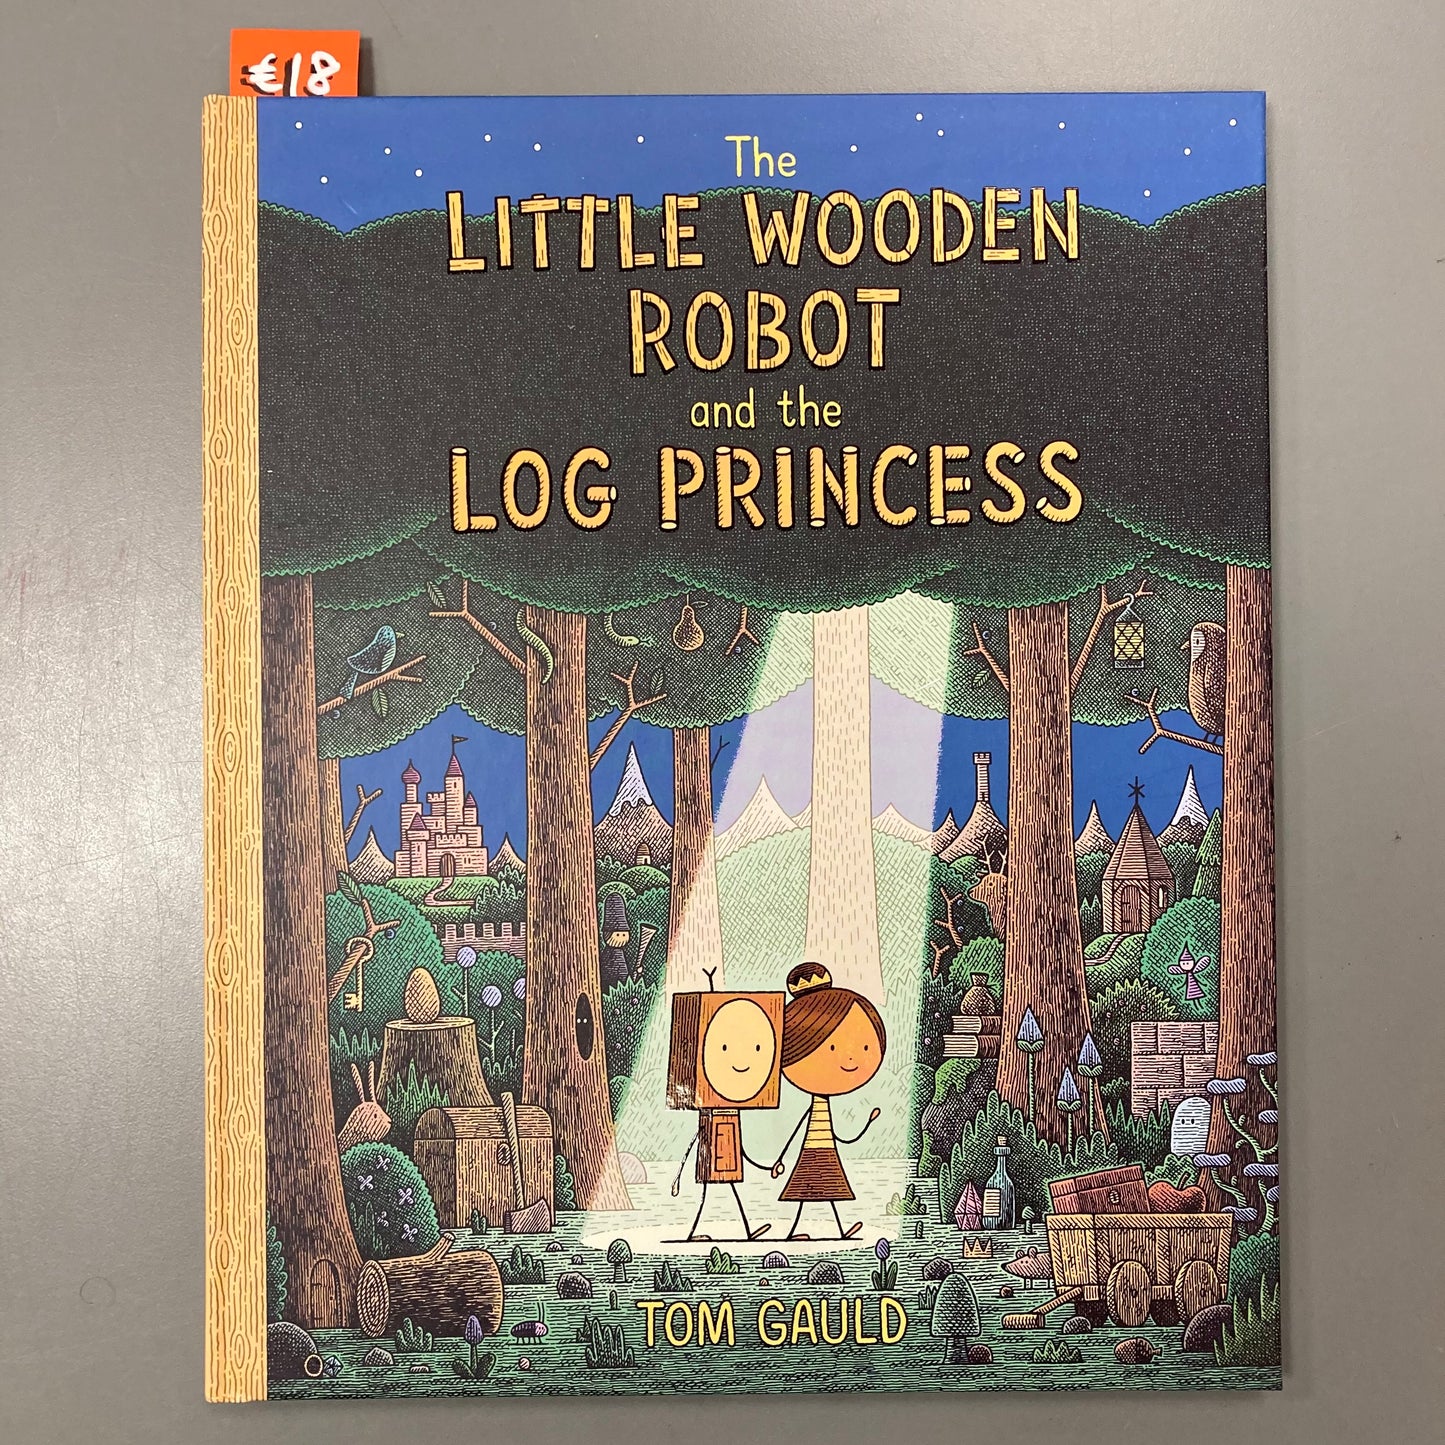 The Little Wooden Robot and the Log Princess (Hardcover)